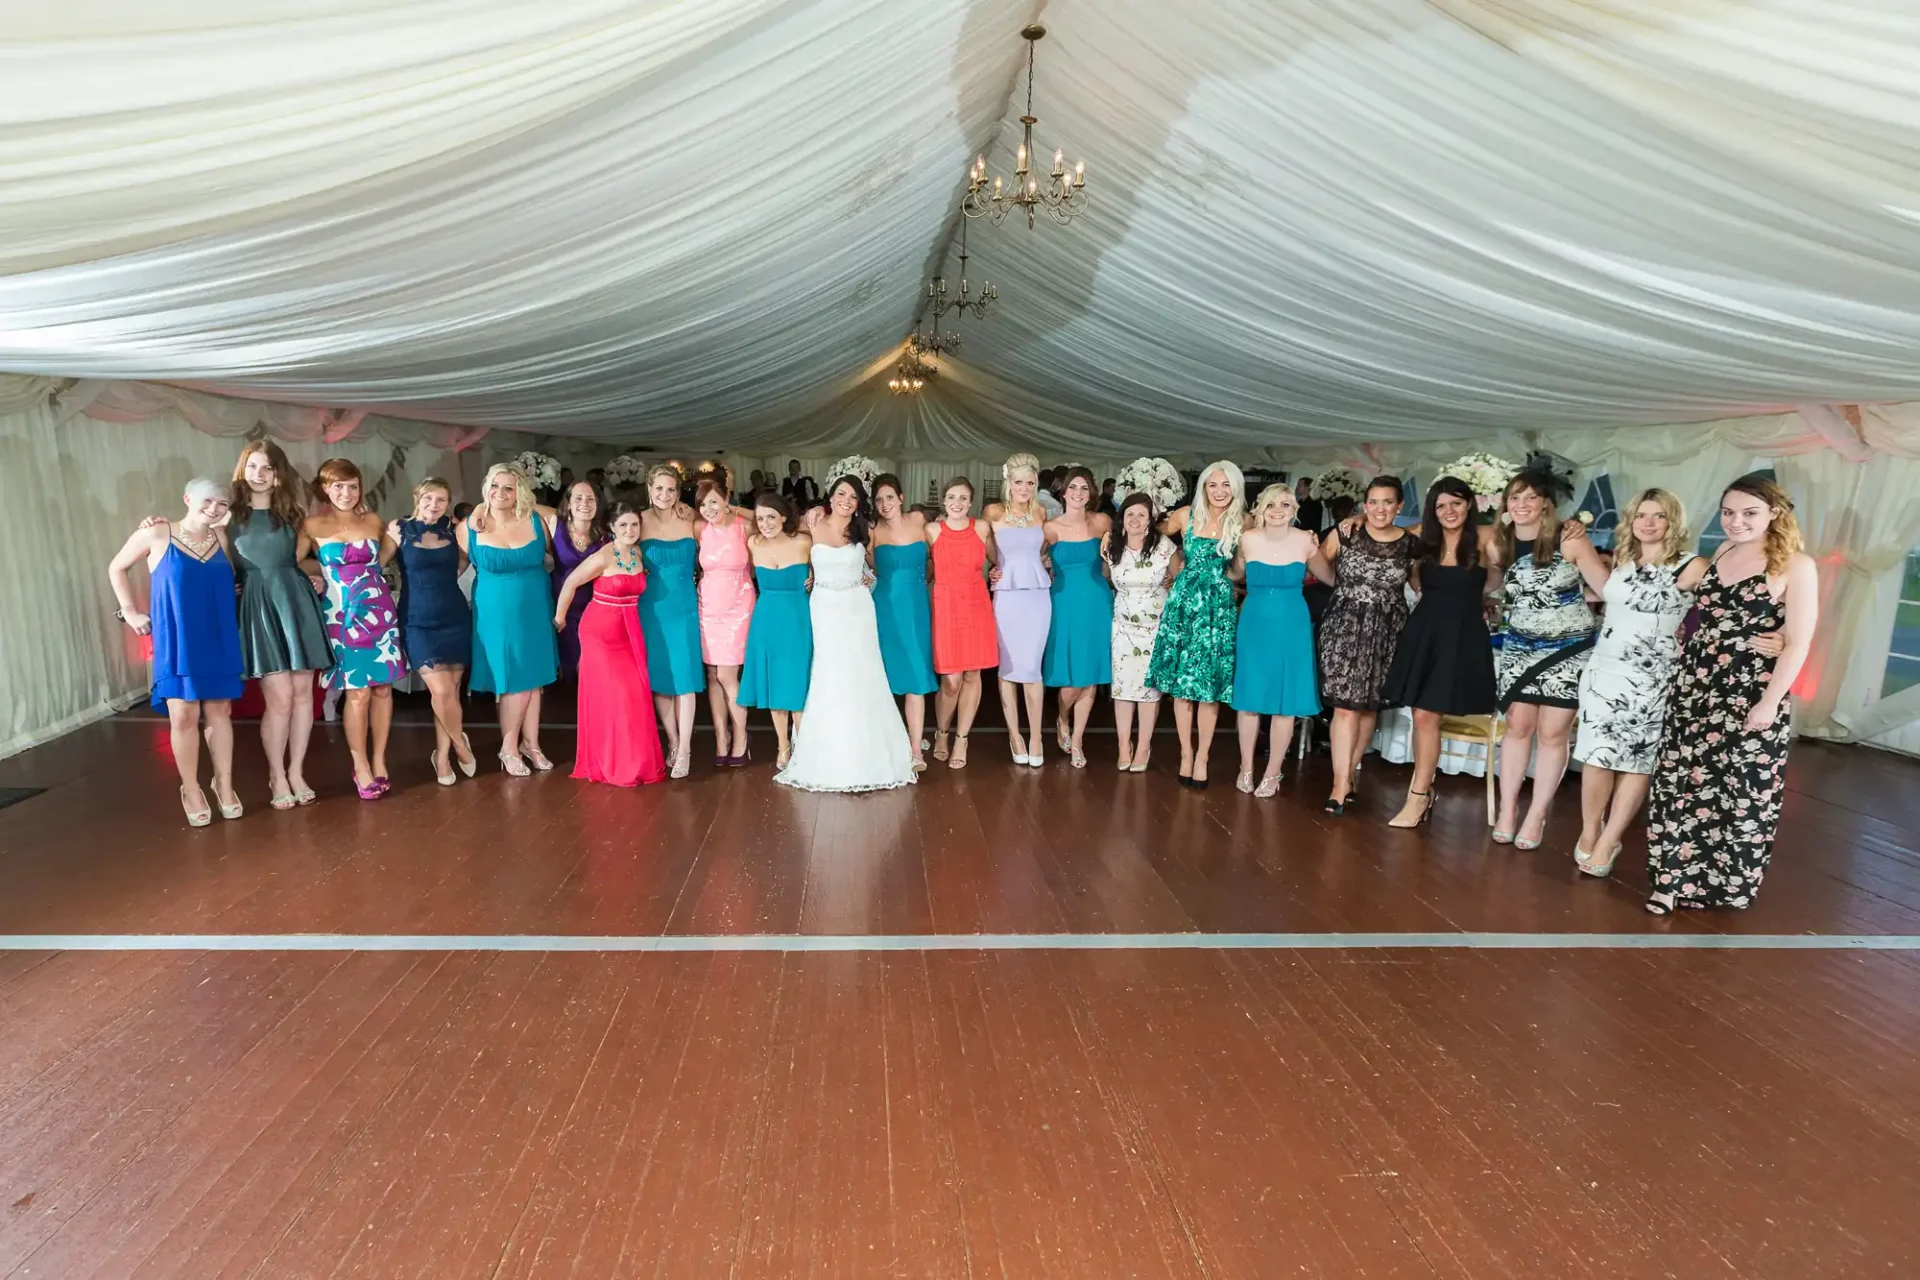 A group of women in formal dresses posing together at a wedding reception inside a tent with draped ceilings and a chandelier.